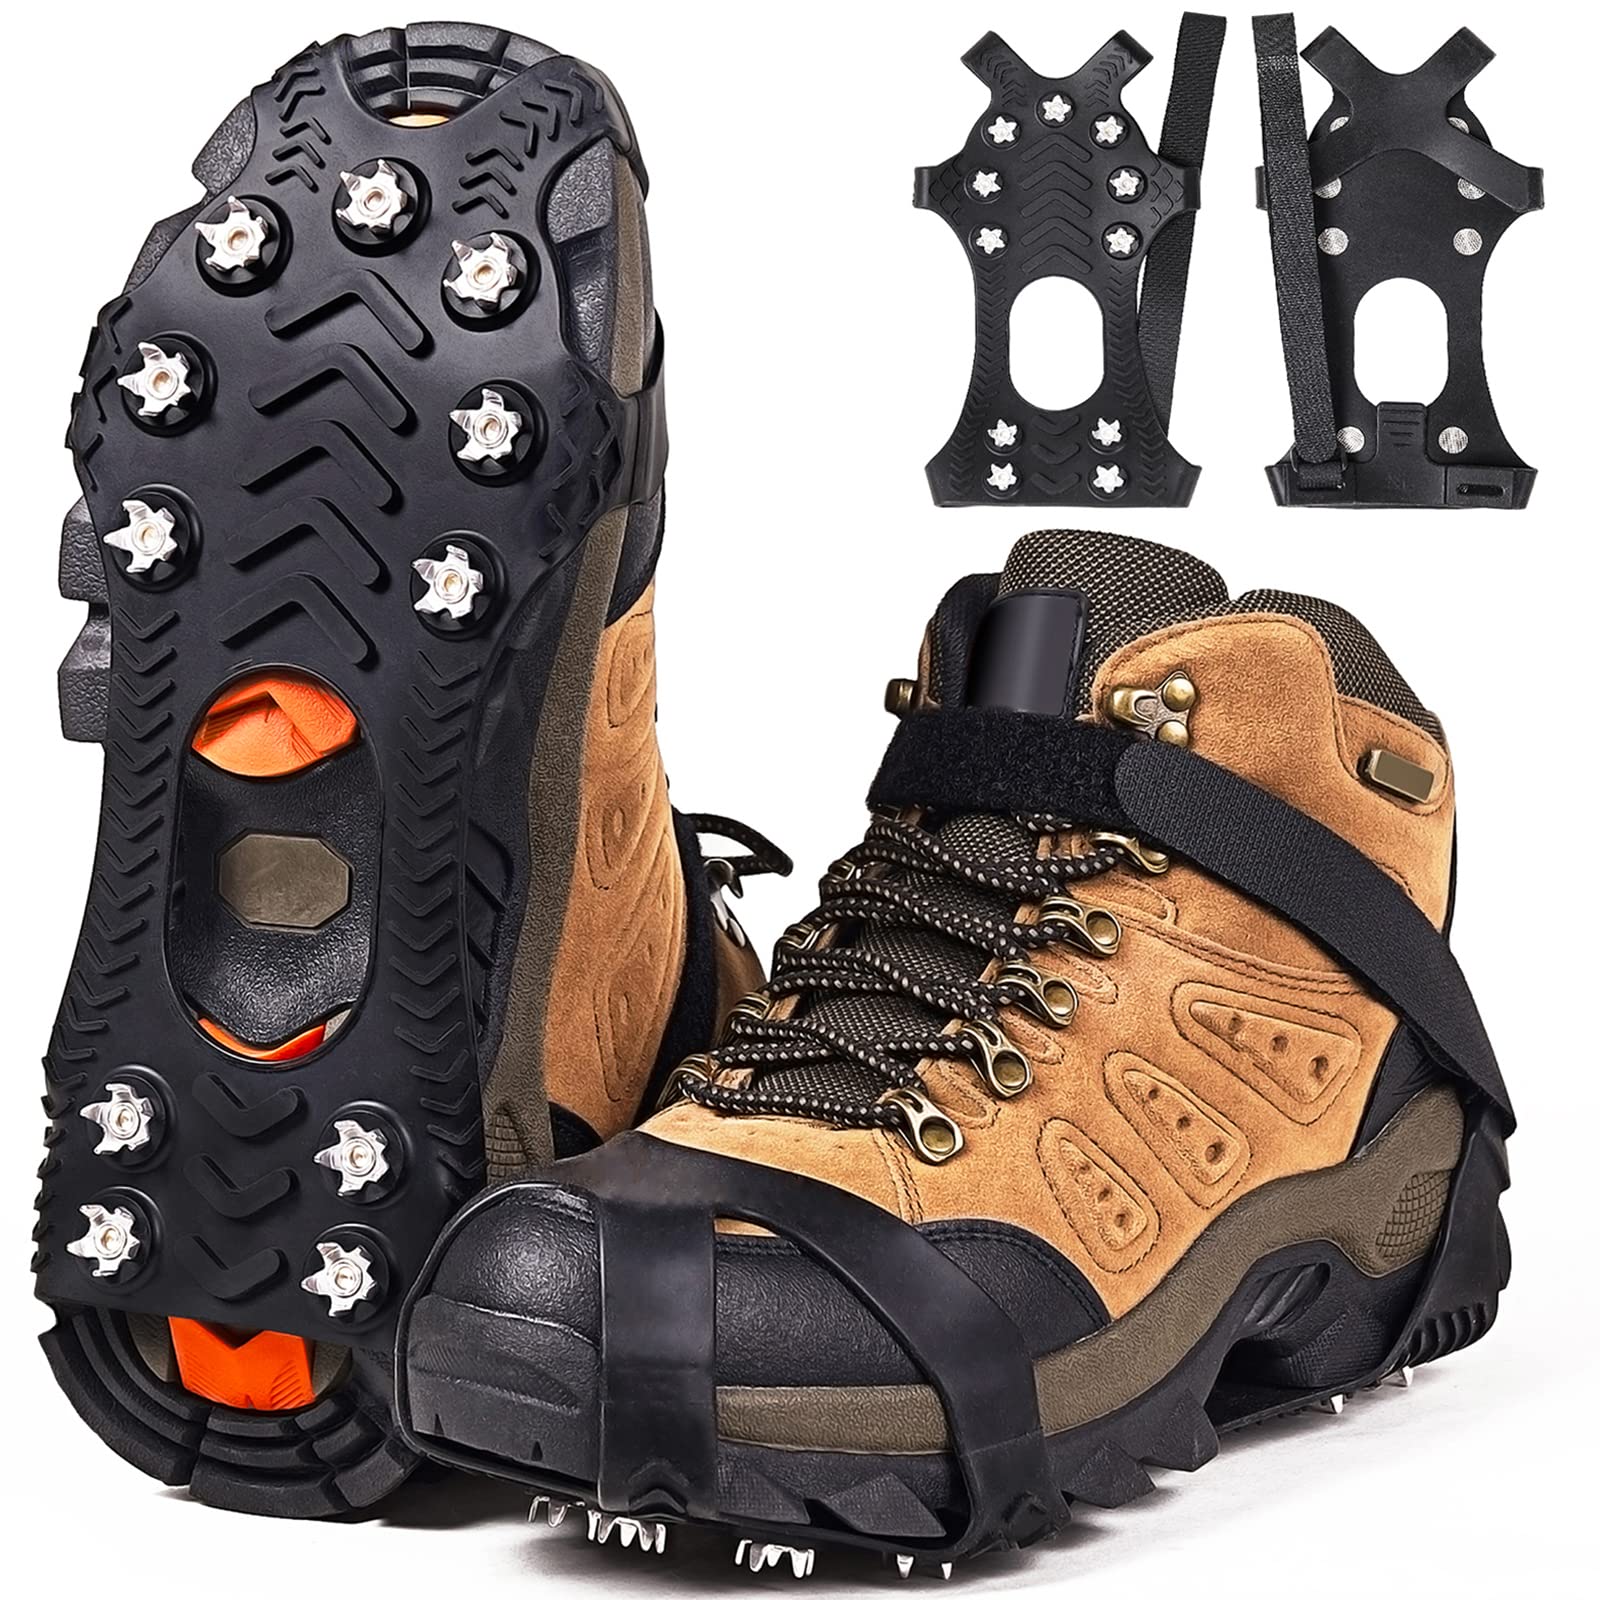 ZUXNZUX Crampons, Ice Cleats for Shoes and Boots, Silicone Stainless Steel  Grippers Shoe Spikes Grips Traction